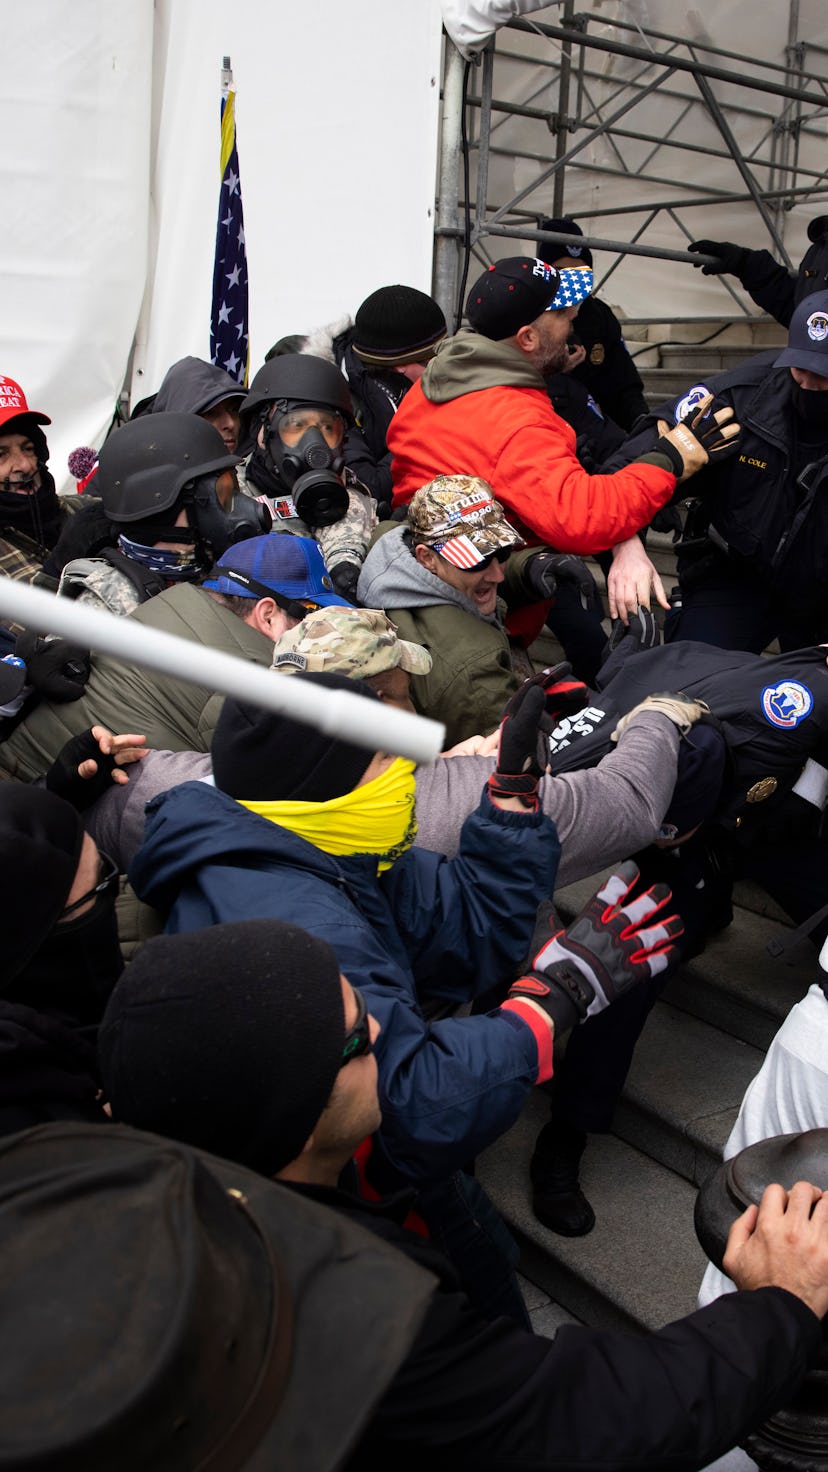 WASHINGTON, DC - JANUARY 06: Trump supporters clash with police and security forces as people try to...